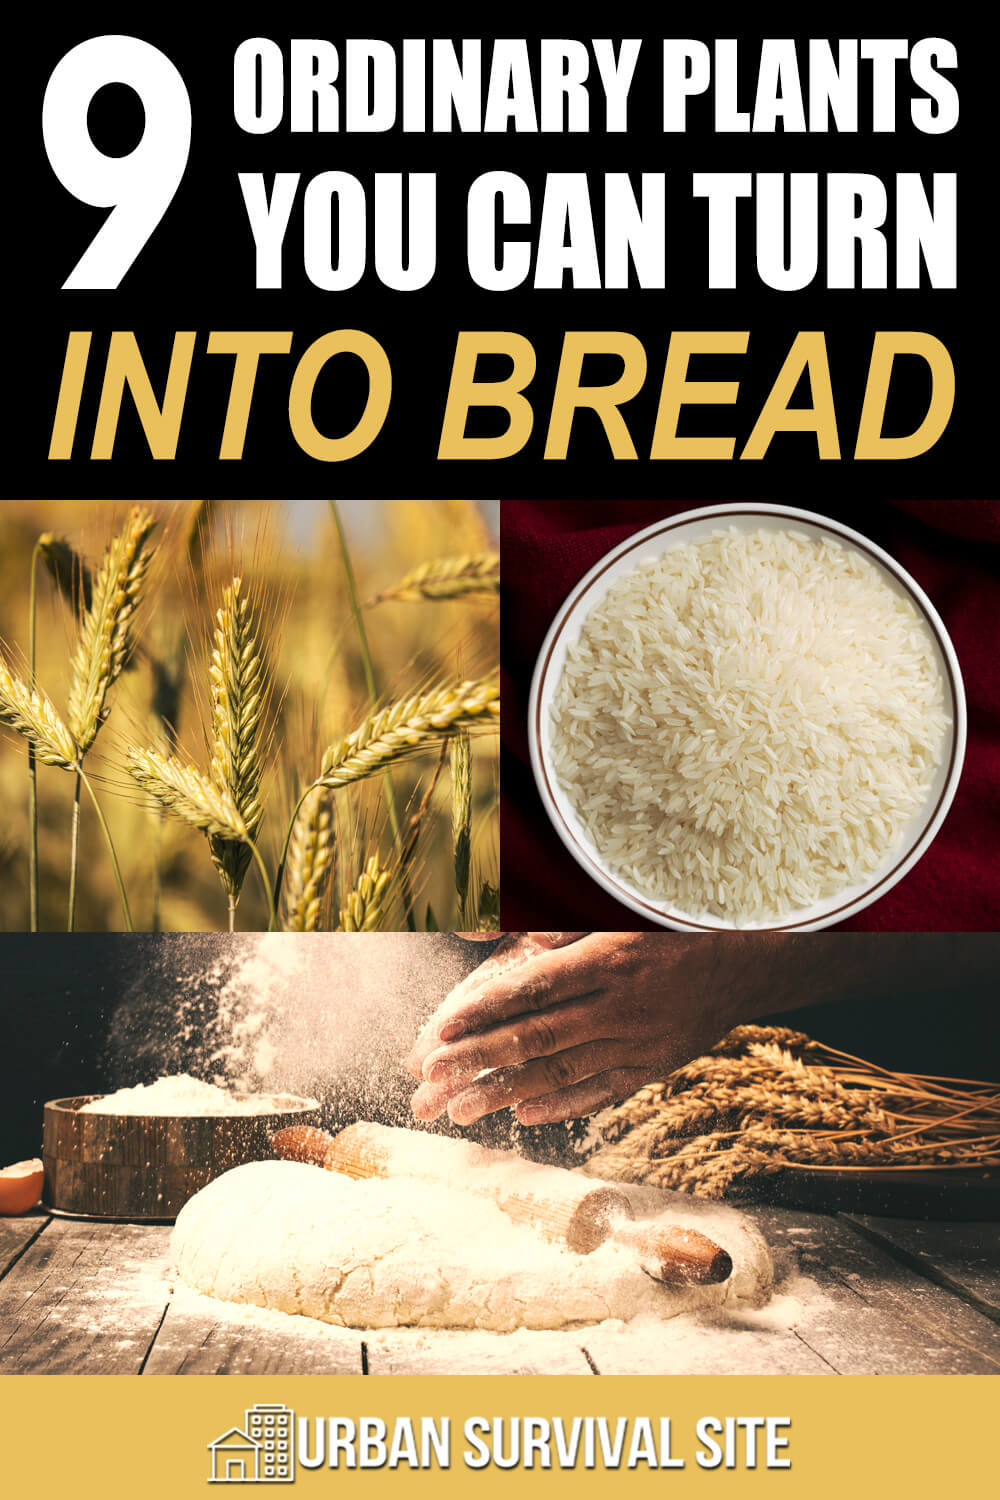 9 Ordinary Plants You Can Turn Into Bread